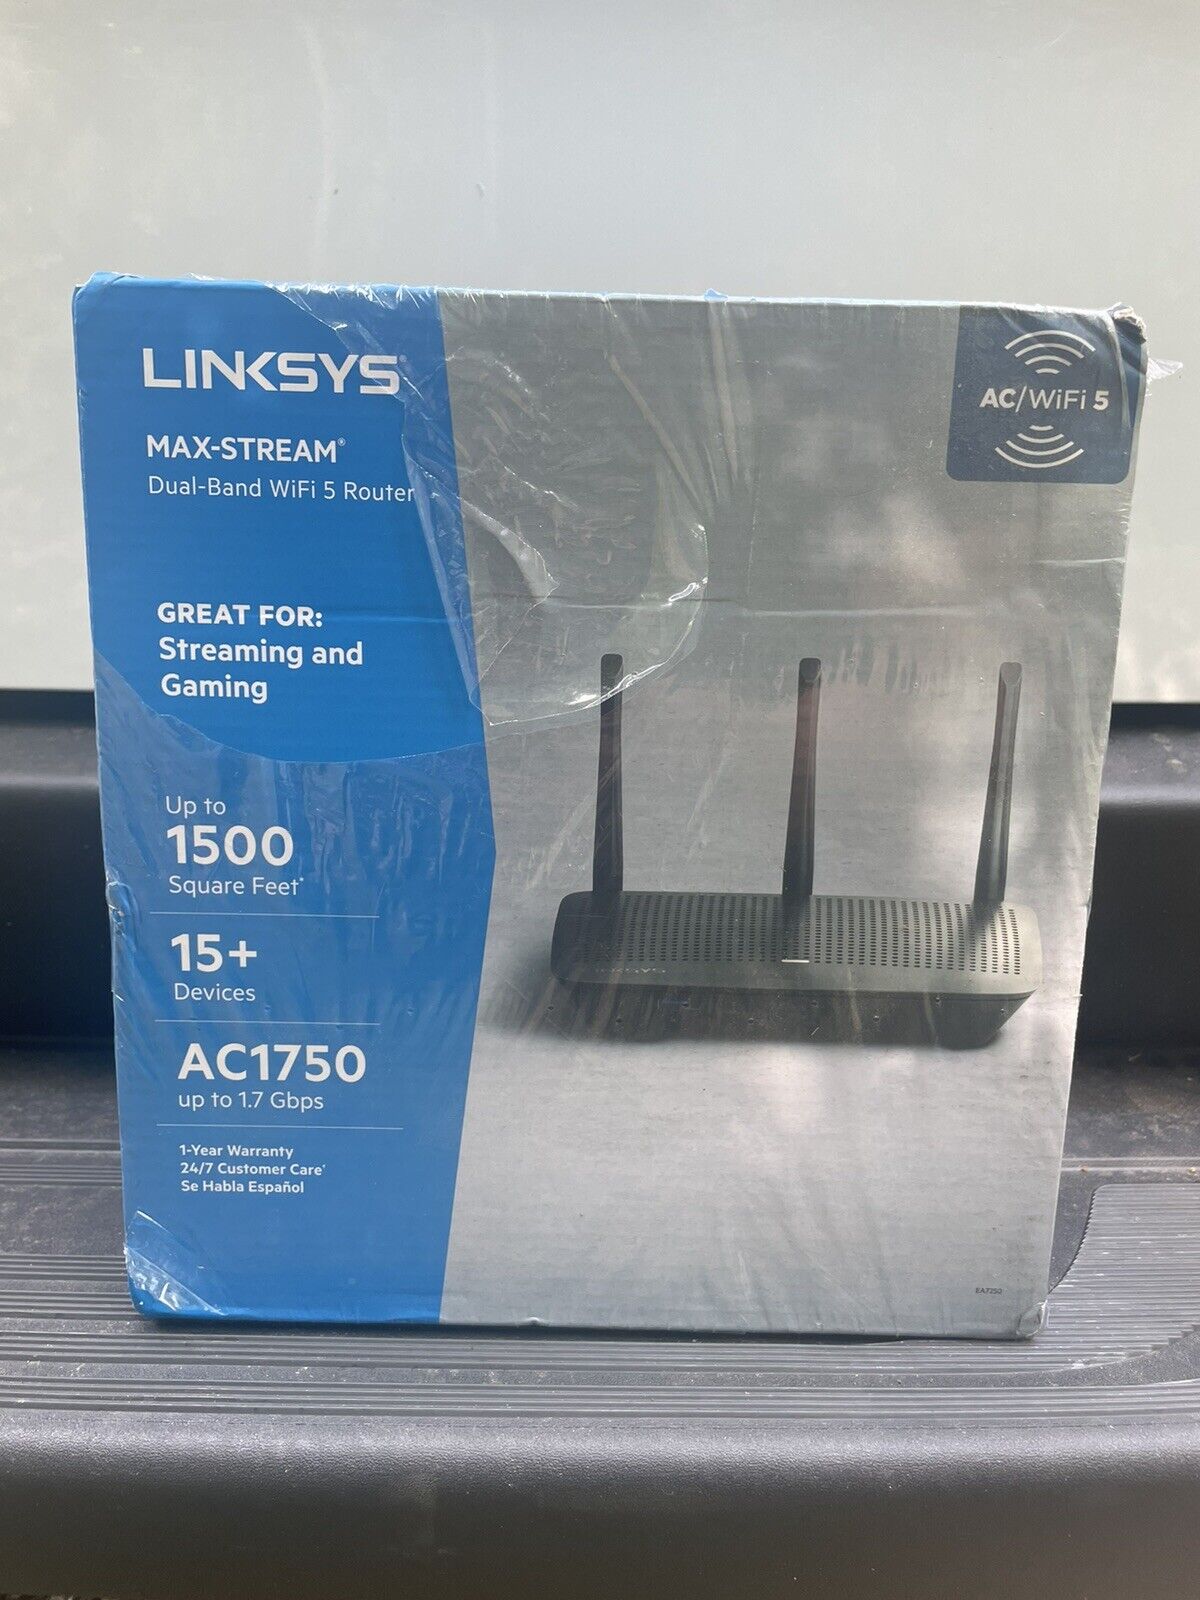 Linksys AC1750 Max-Stream AC1750 Wi-Fi 5 Router 1500 1.7 Gbps - NEW SEALED